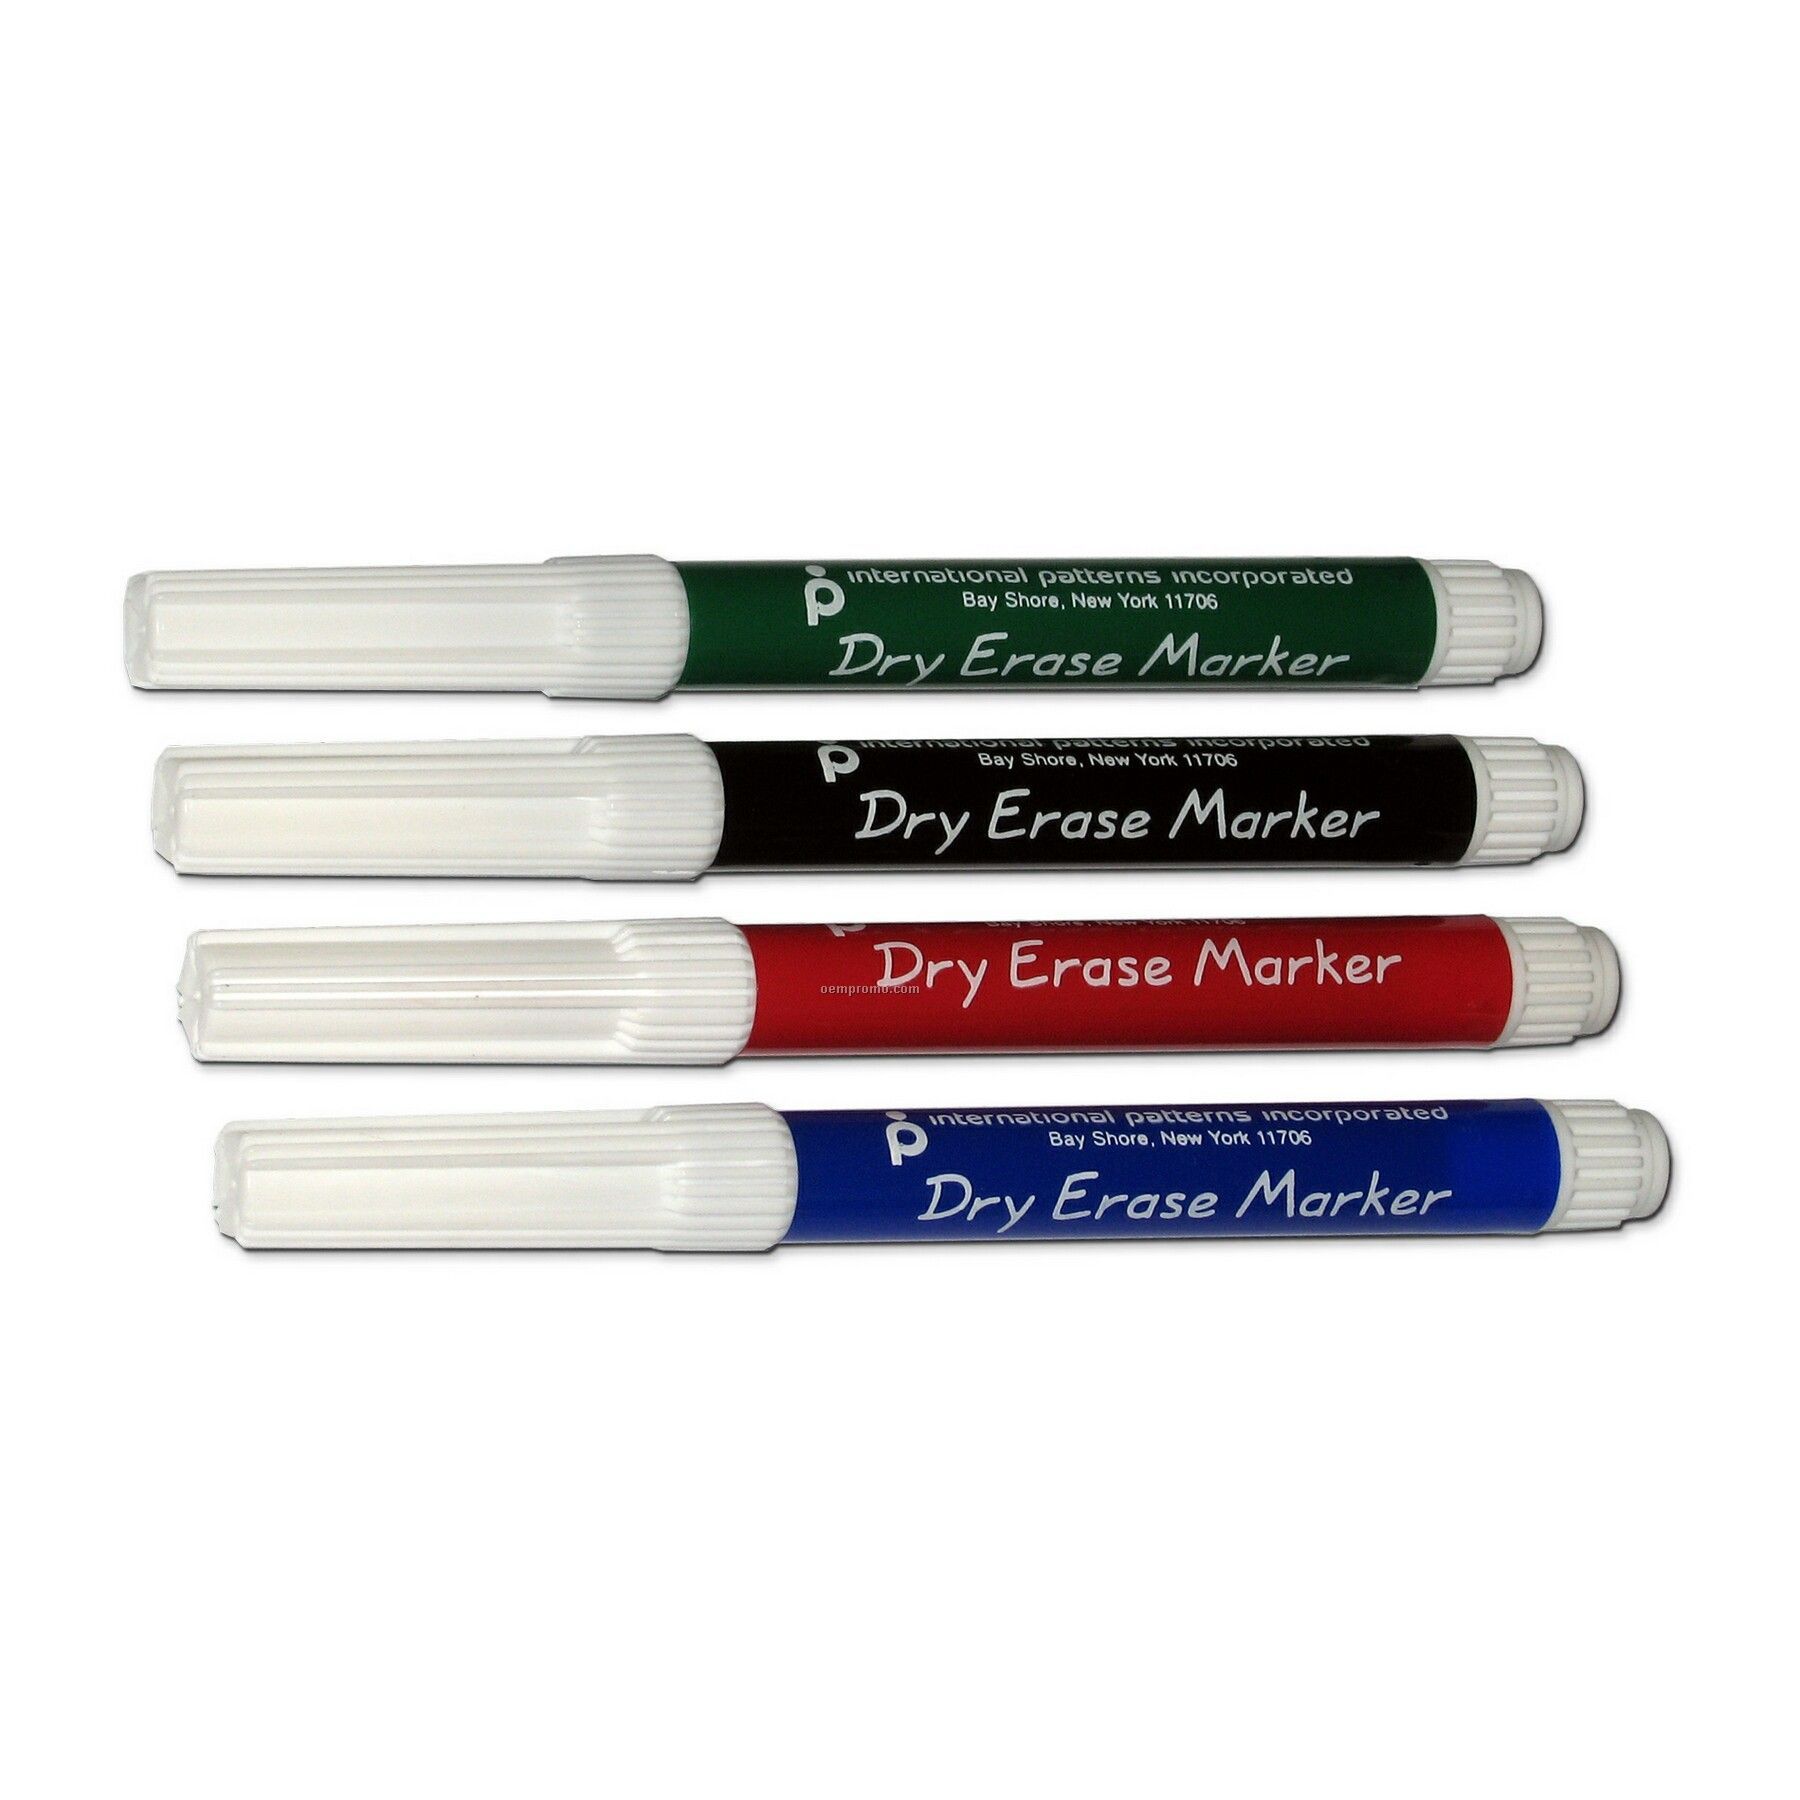 Dry Erase Marker For White Write-on Boards (4 Pack)